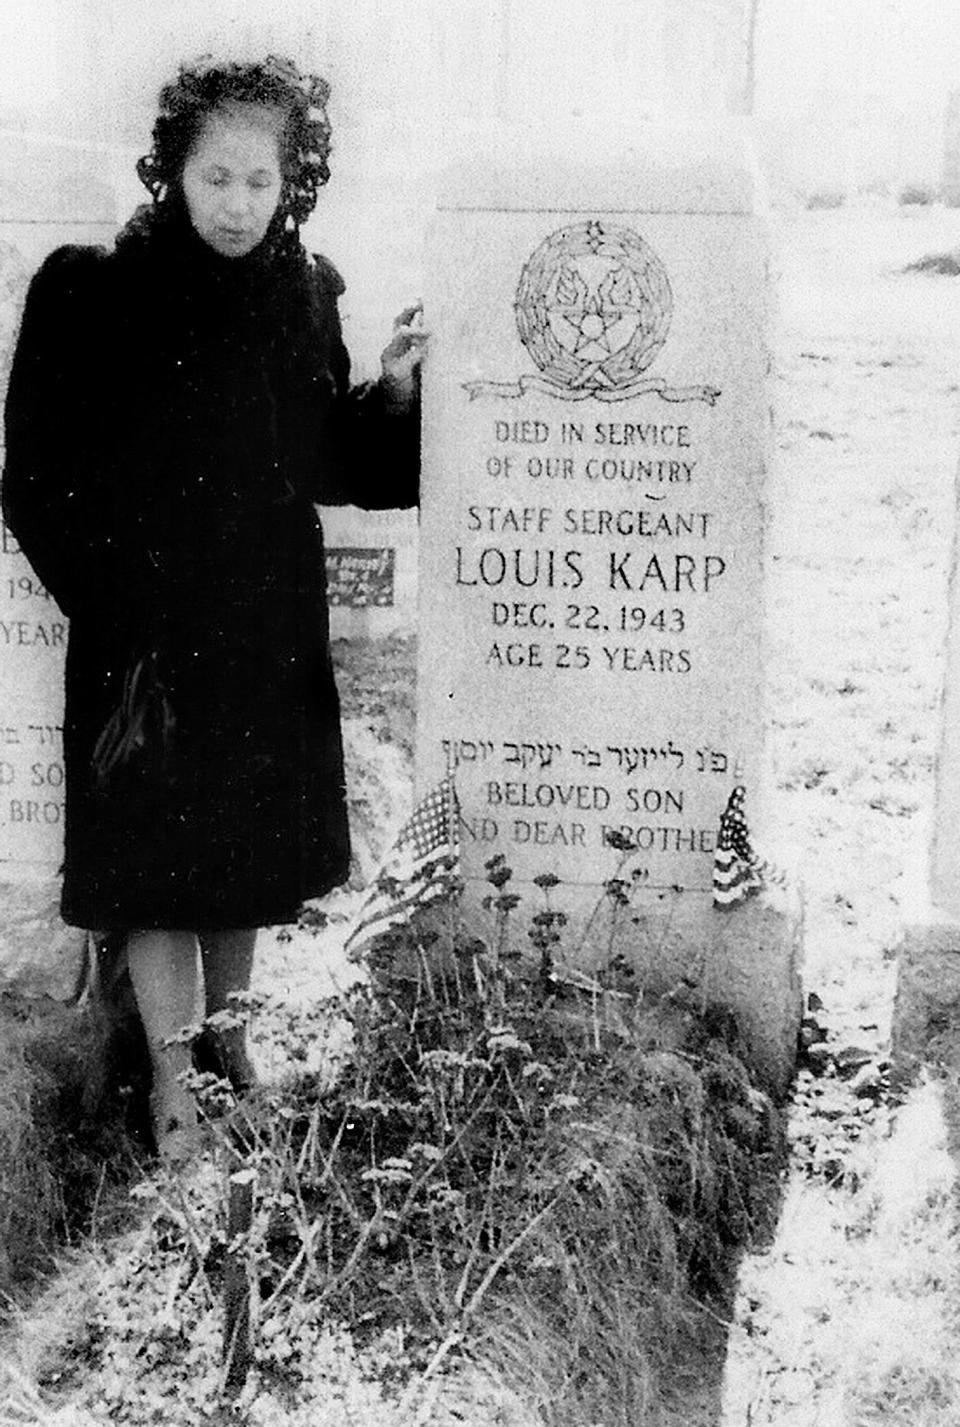 In an undated photograph believe to be from the 1940s, Louis Karp's mother Jennie makes one of her nearly weekly visits to his grave in New York. When Louis died, she had two other sons in the war. When another was shot down and believed killed, she asked the president to bring the other home.